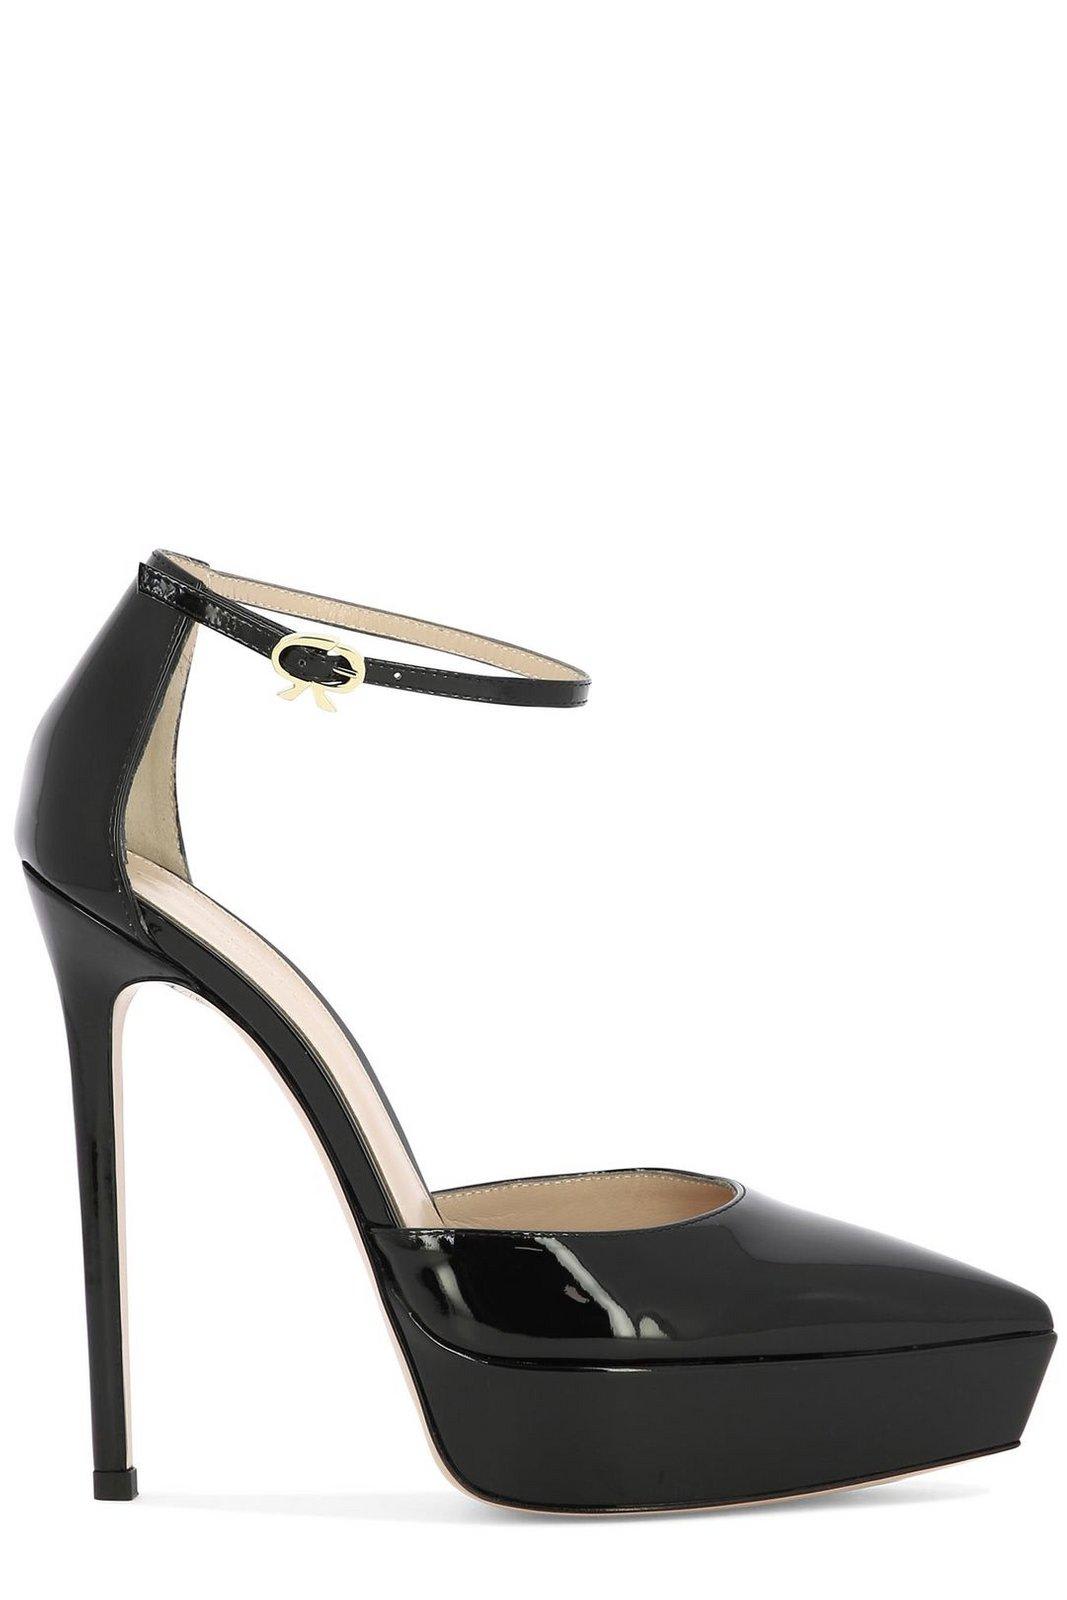 GIANVITO ROSSI KASIA POINTED TOE PUMPS